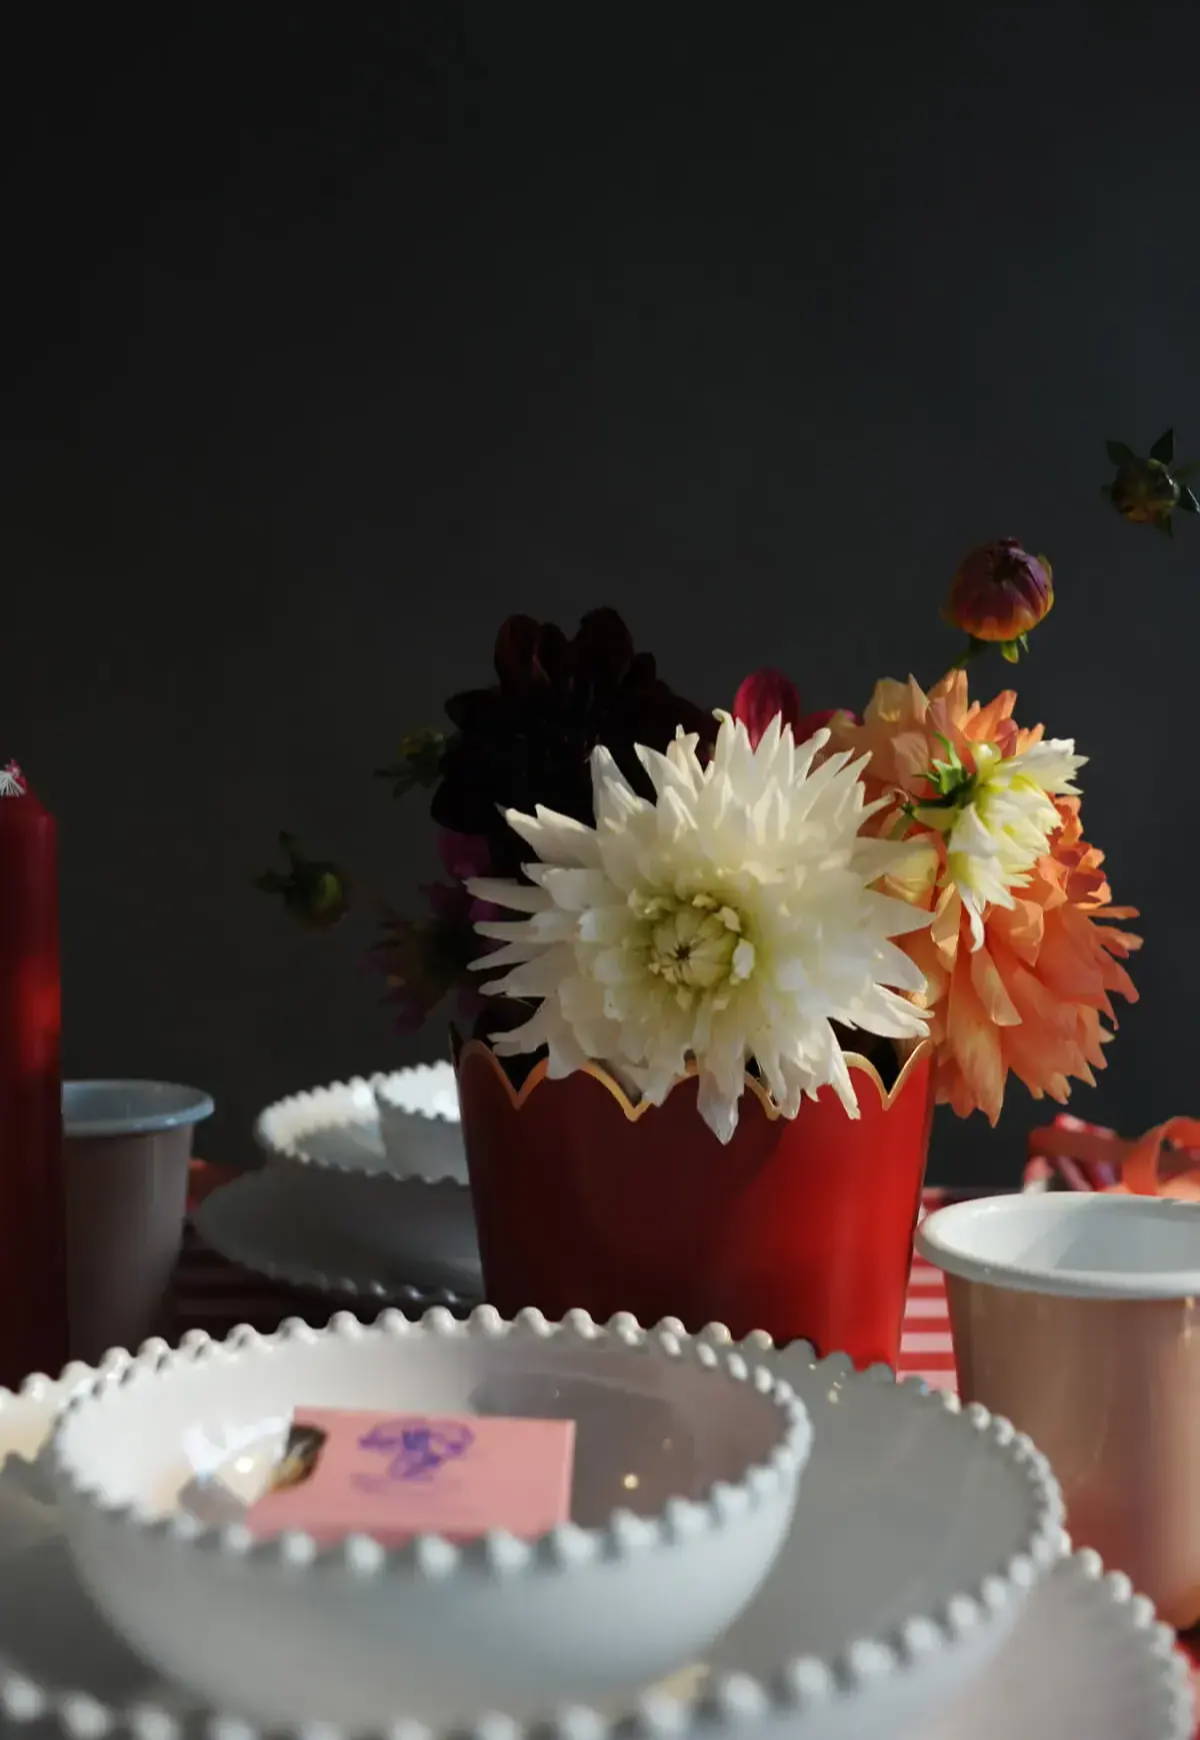 A close up image of some dahlias in the Tooka Red Scallop Planter.